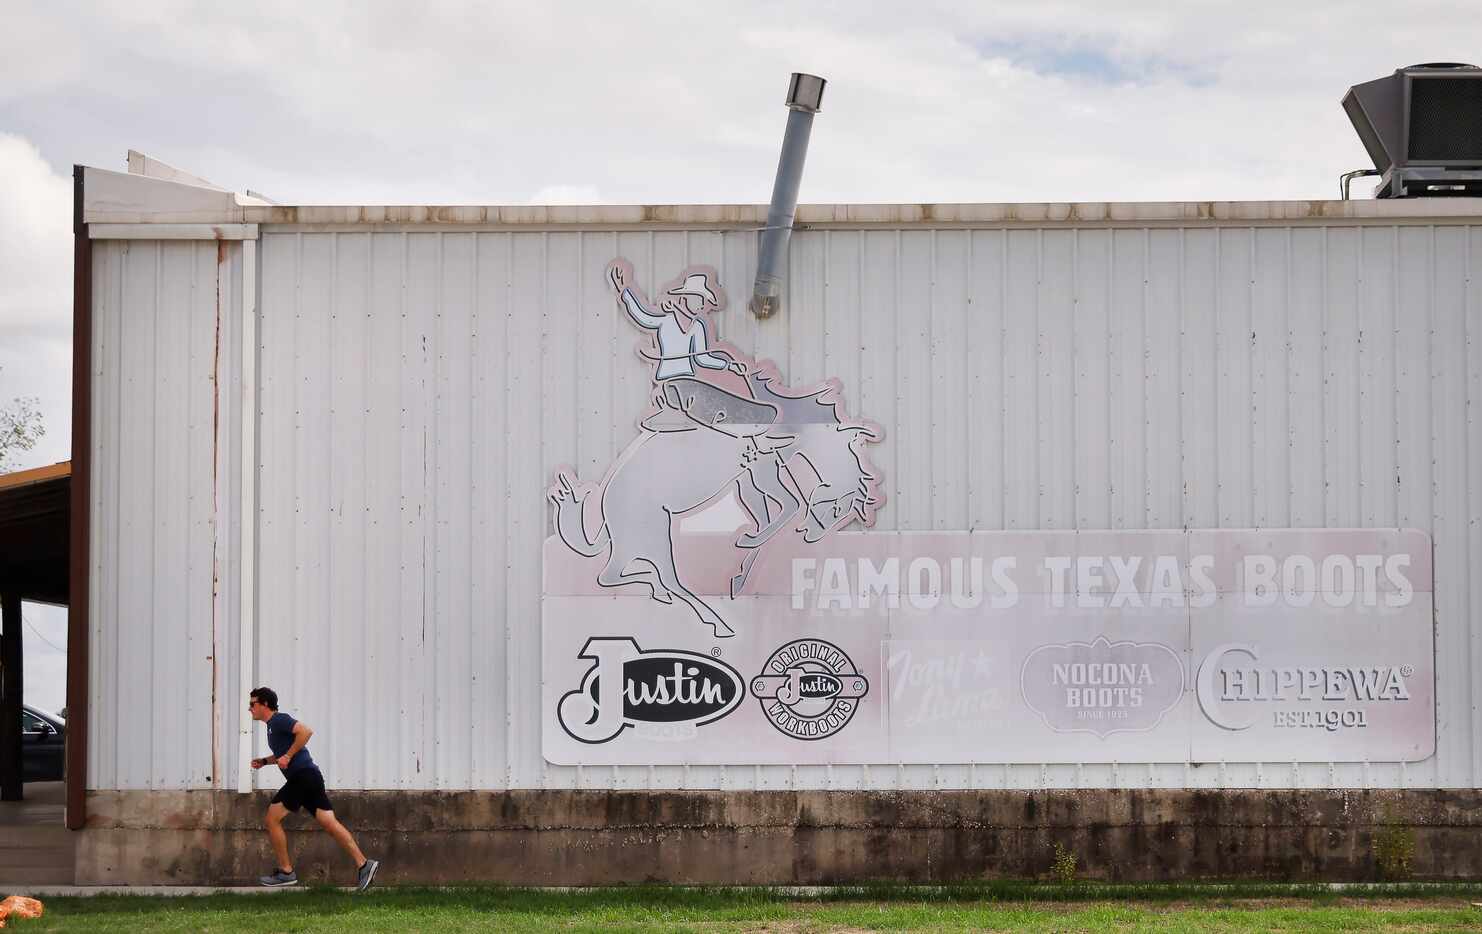 A man runs past the Justin Discount Boots Warehouse along FM 156 in Justin on Aug. 23.